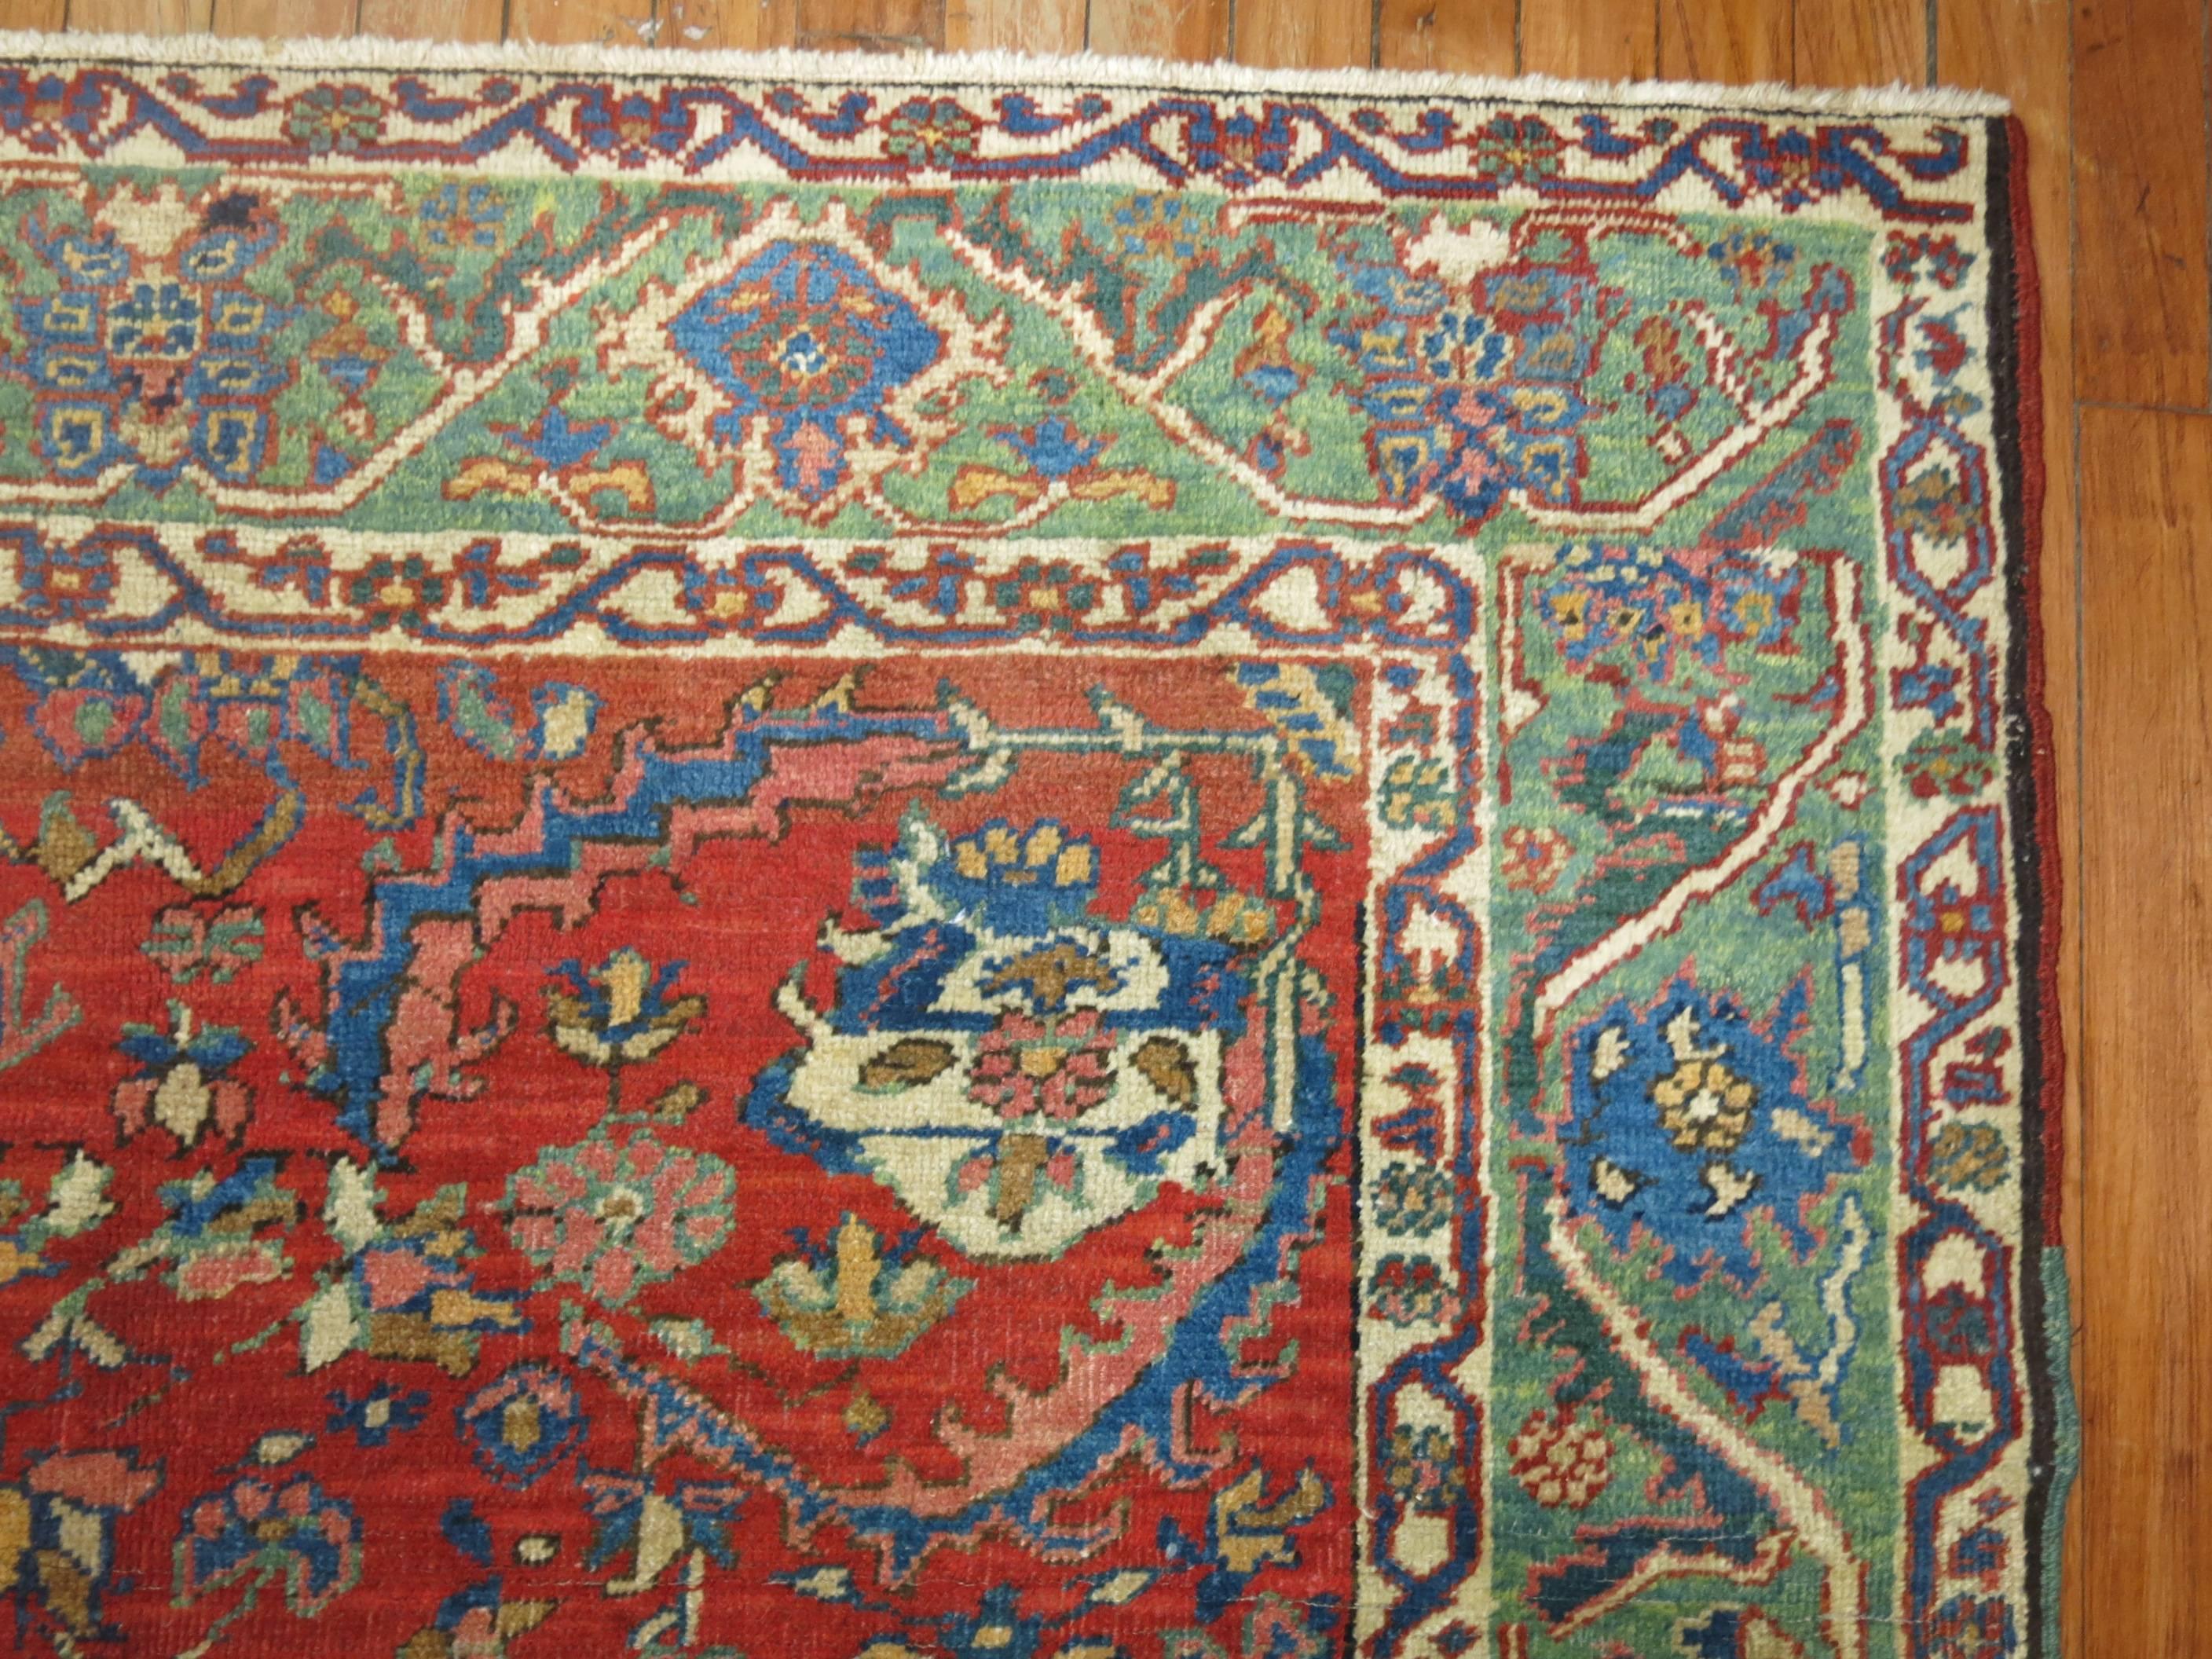 A colorful antique Persian Heriz rug with an orange-coral field and green border with accents in sky blue.

Measures: 4'10